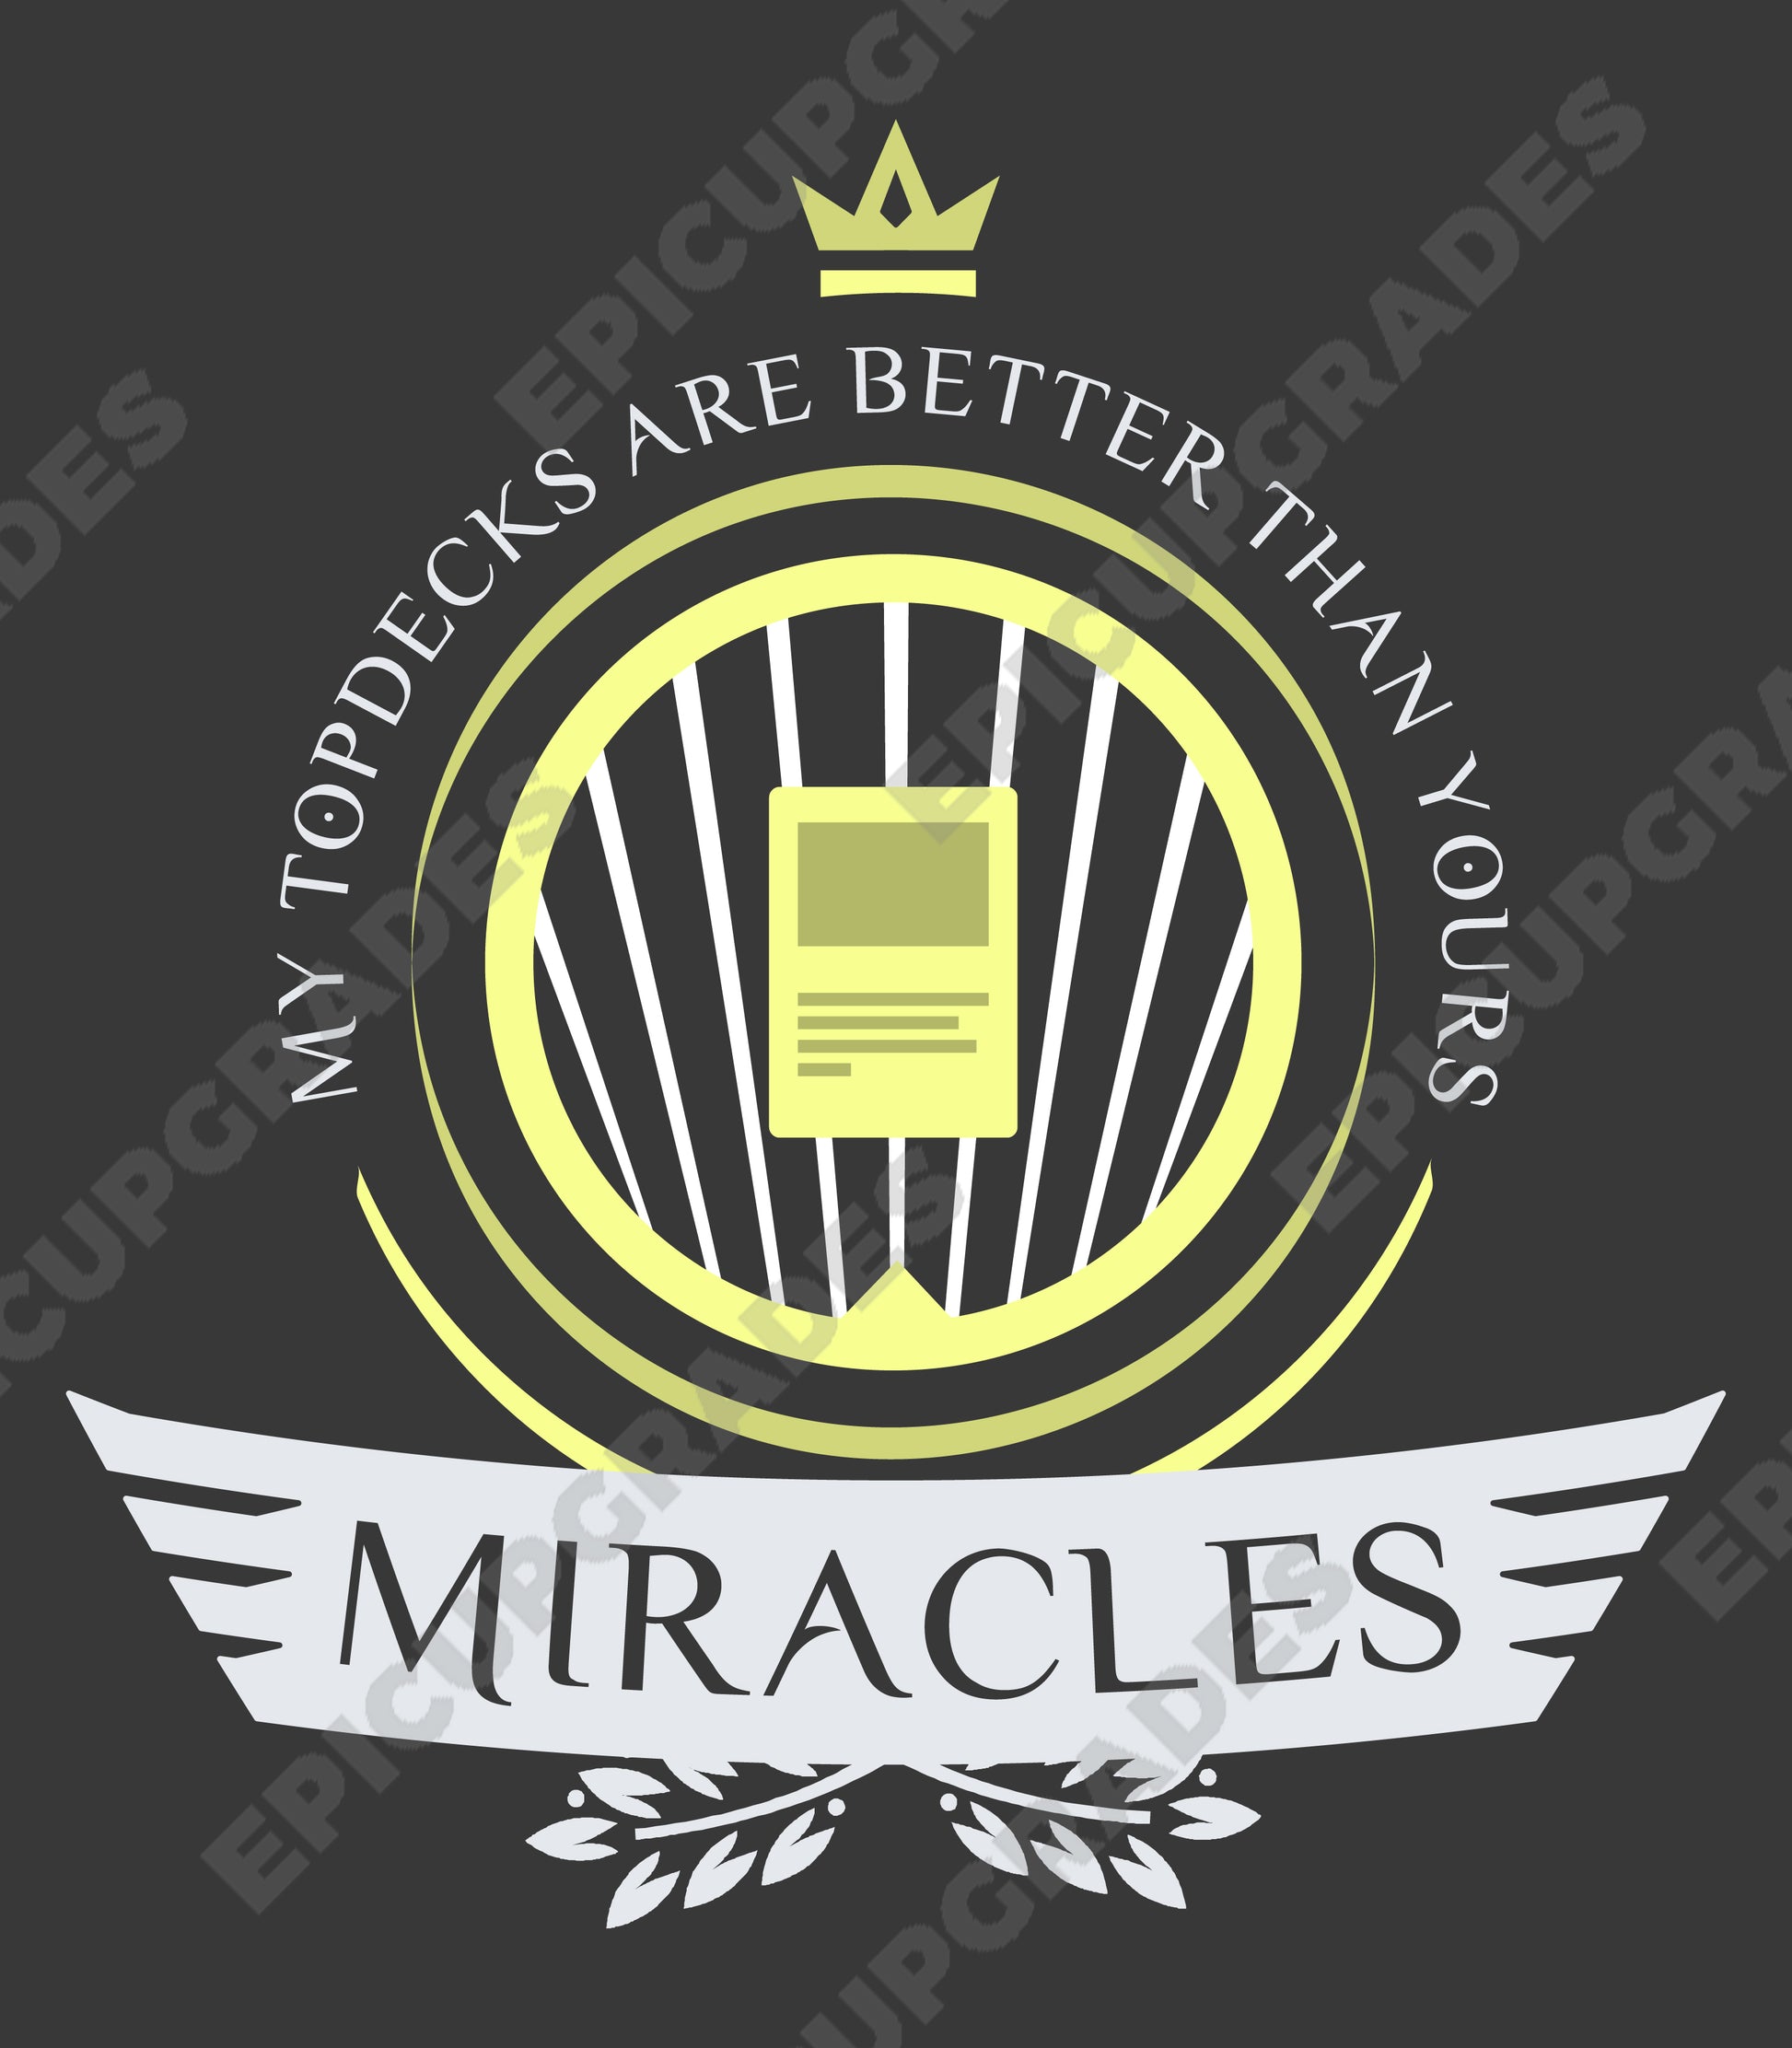 Miracles Life - Magic the Gathering Unisex T-Shirt - epicupgrades